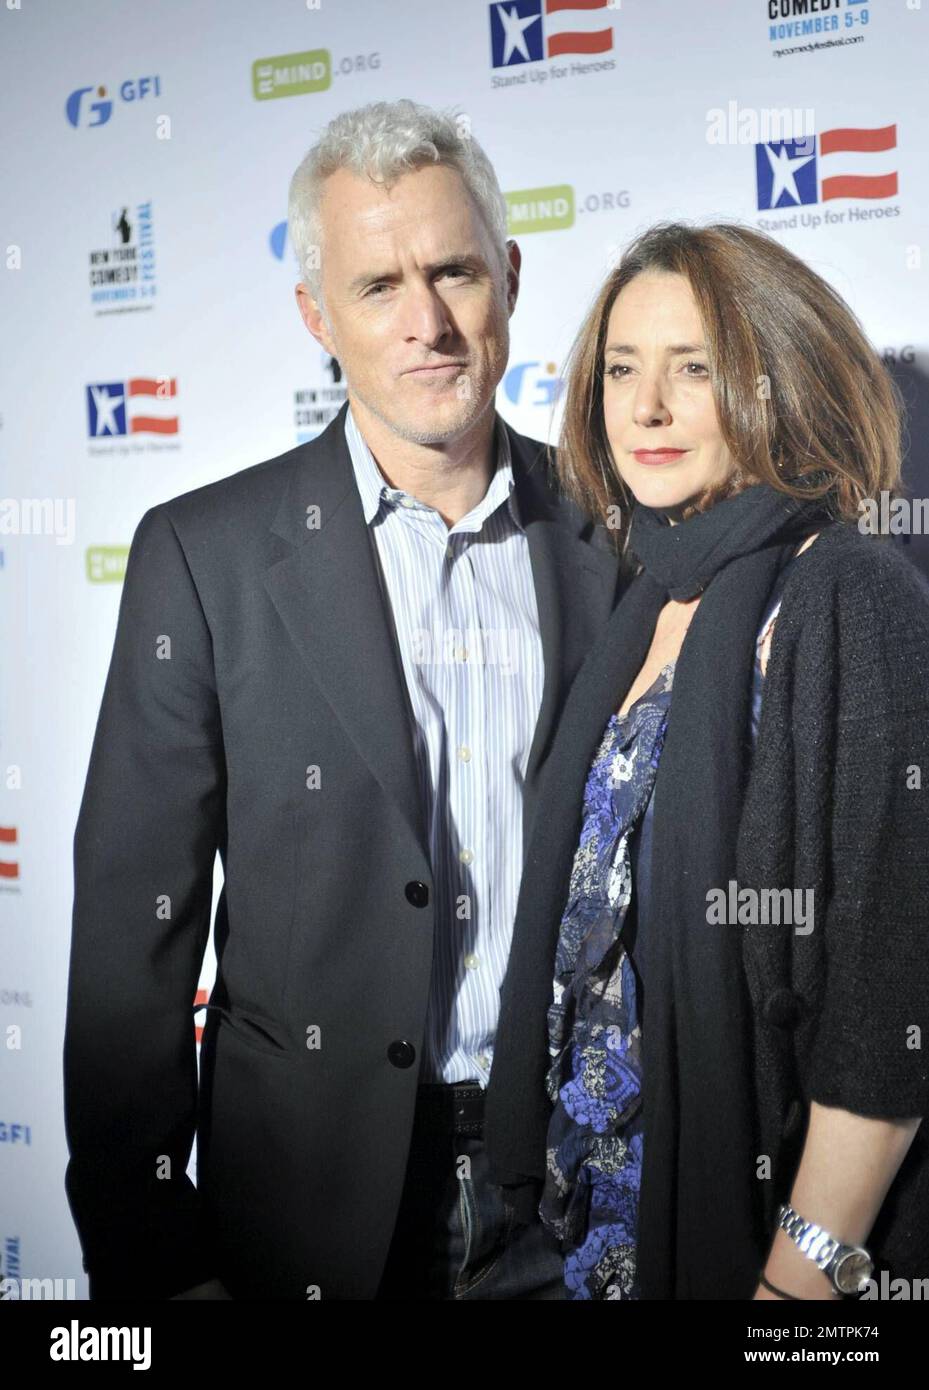 John Slattery (Mad Men) and wife Talia Balsam Attend New York Comedy Festival's Stand Up For Heroes: A Benefit for the Bob Woodruff Foundation at Town Hall. New York, NY. 11/5/08. Stock Photo